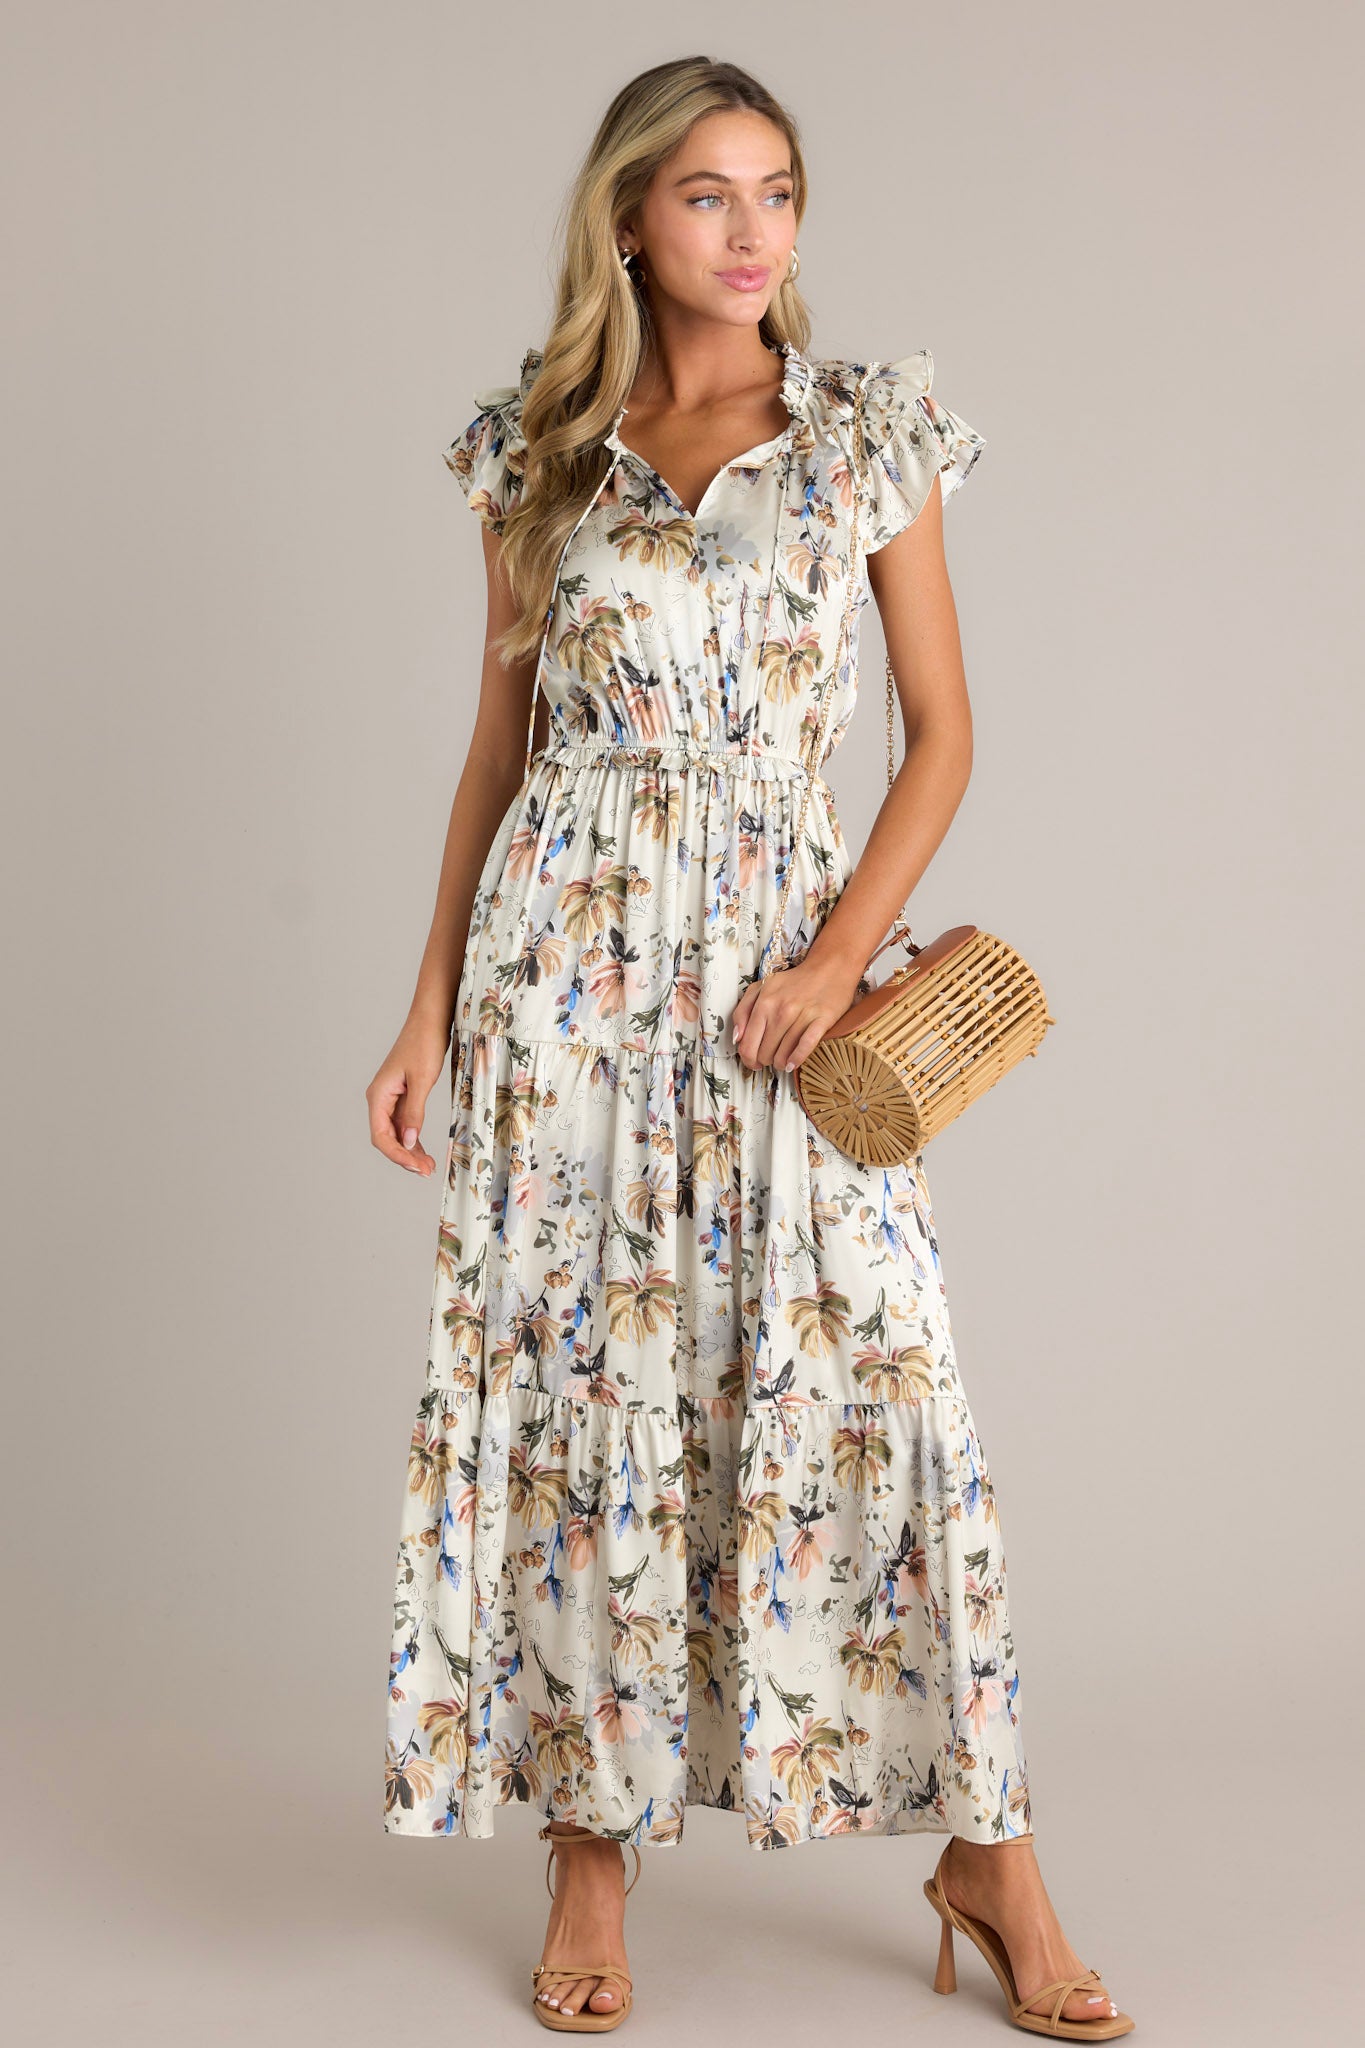 This ivory floral dress features a v-neckline, a self-tie drawstring, a floral pattern, a tiered design, tiered sleeves and a flowing silhouette.